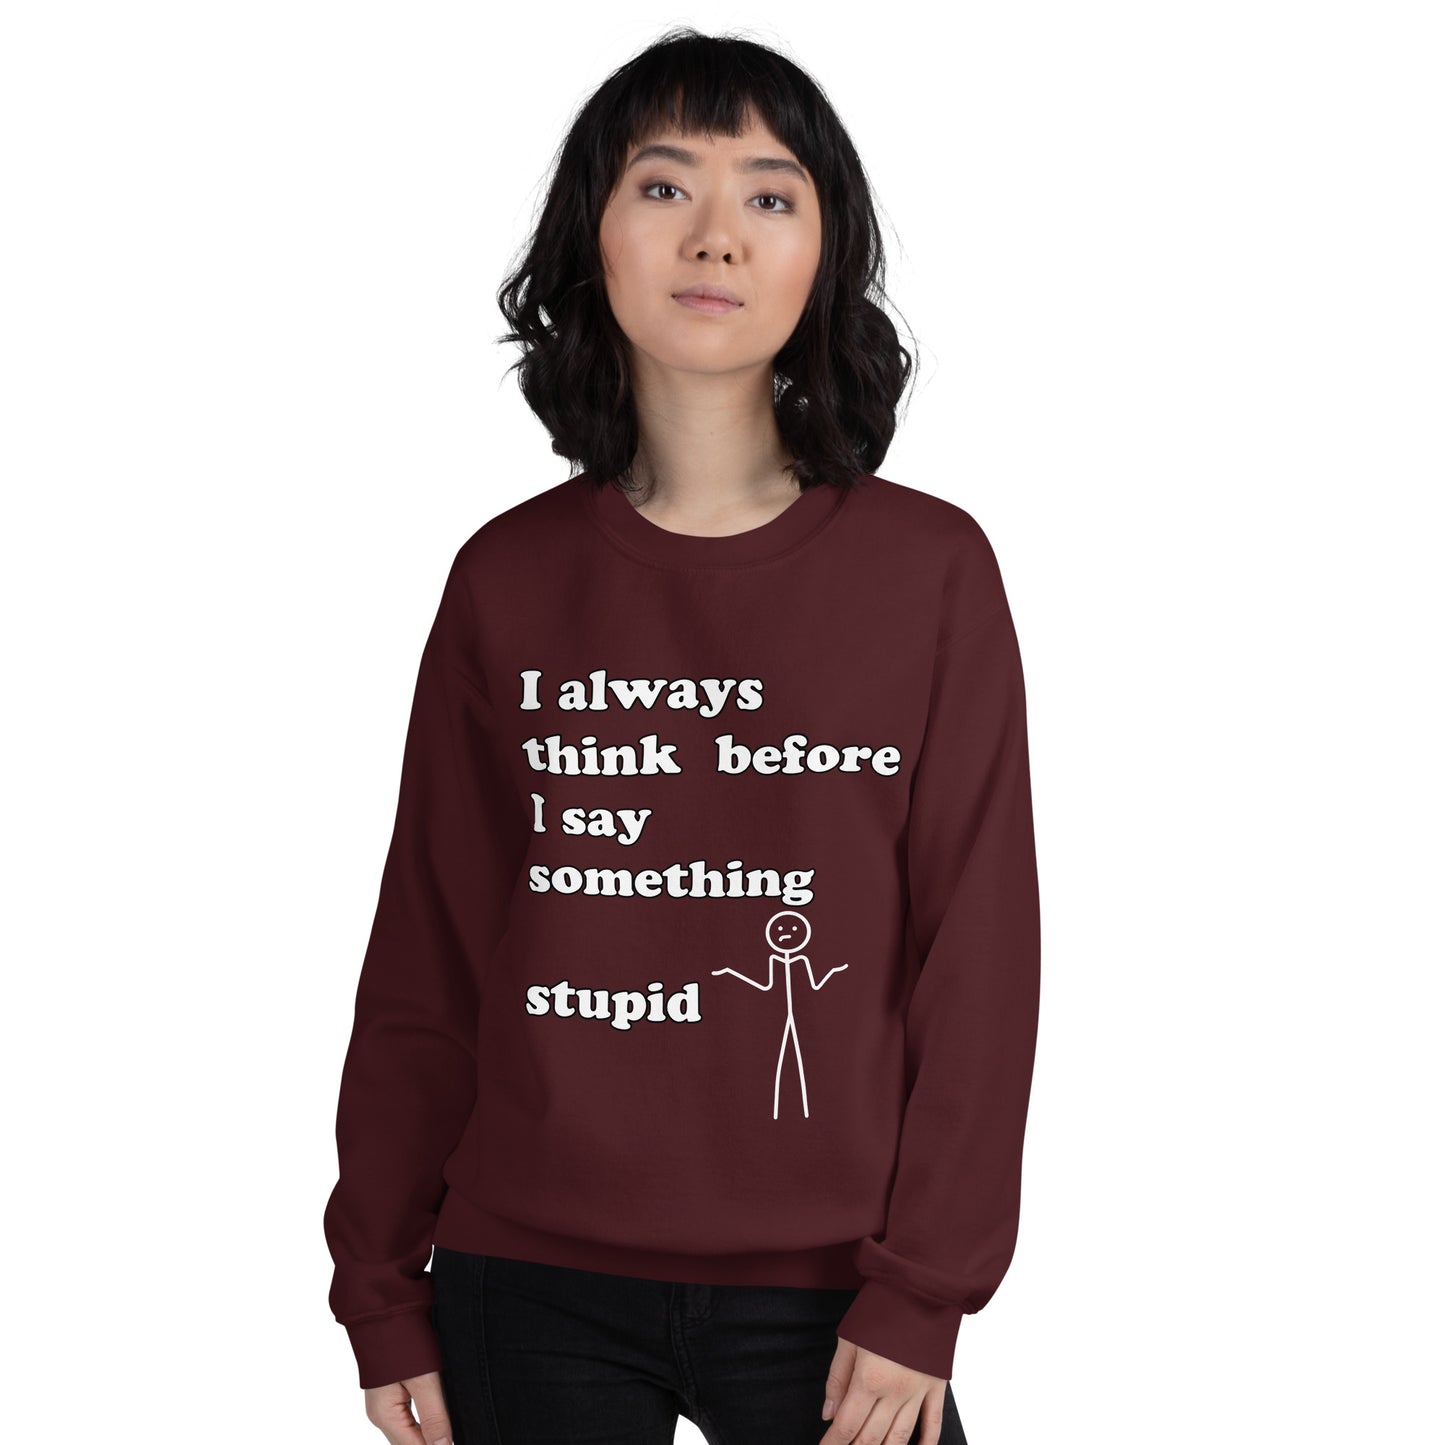 Woman with maroon sweatshirt with text "I always think before I say something stupid"